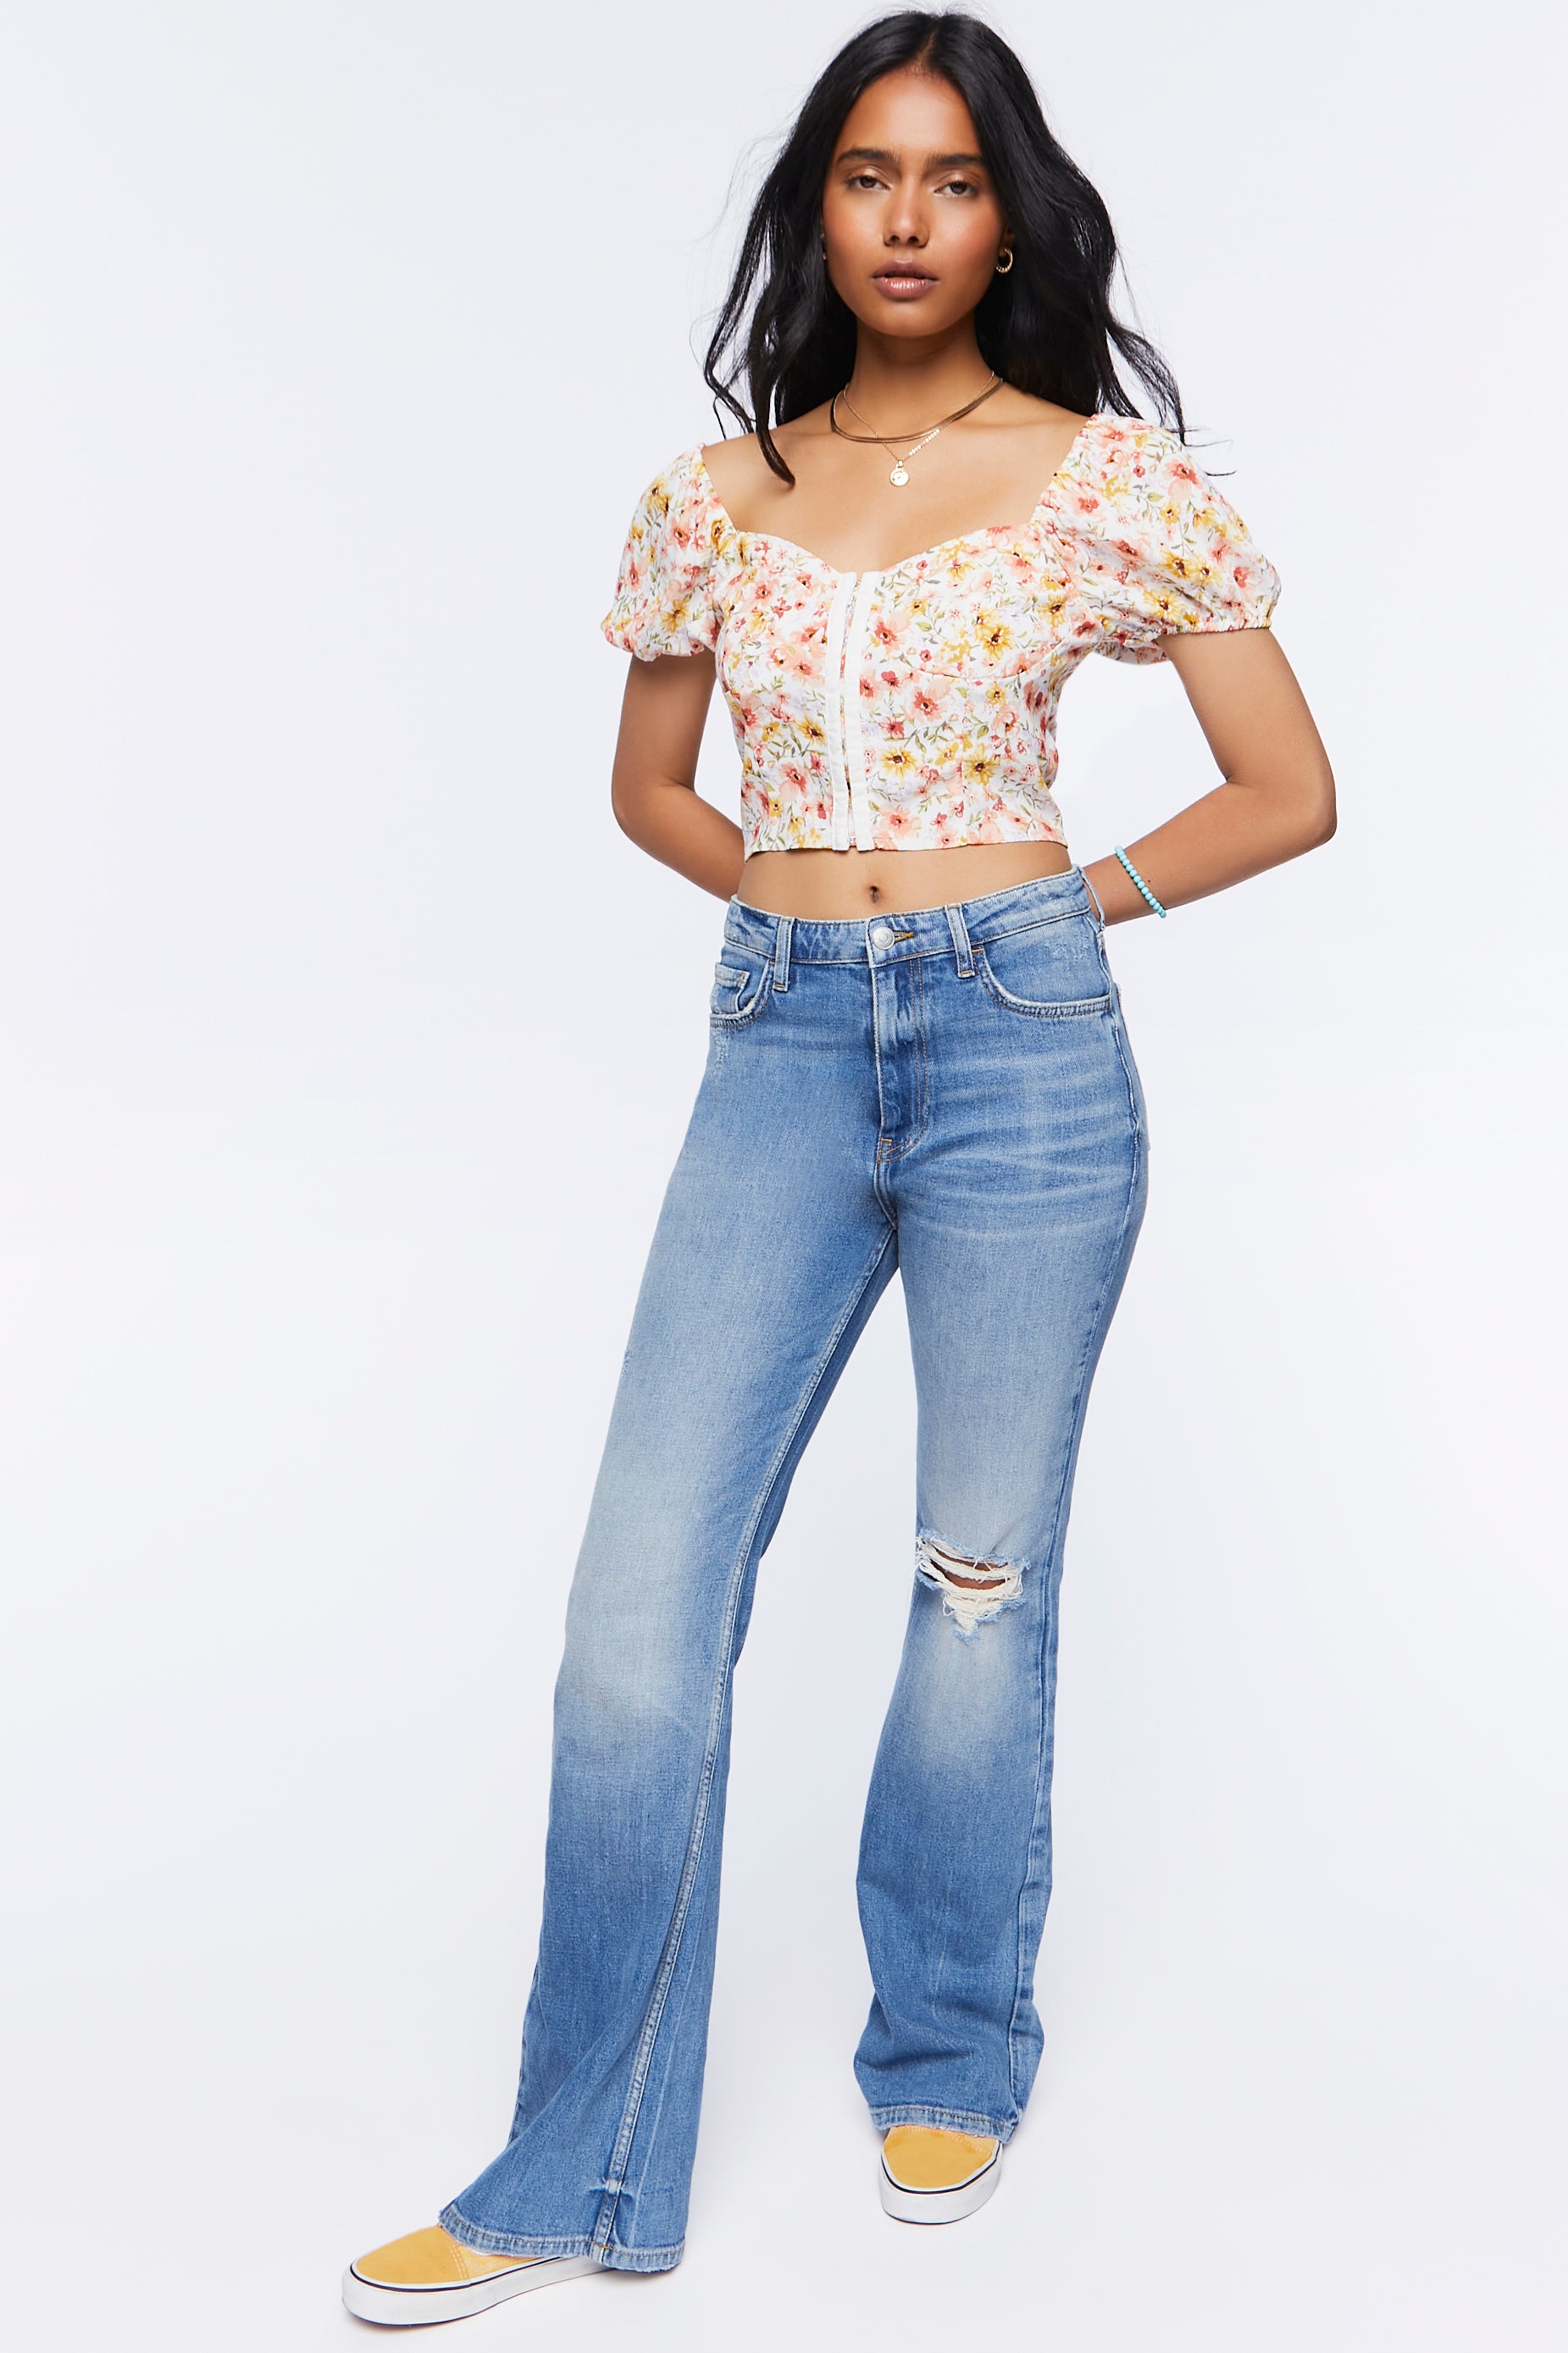 Ivorymulti Sweetheart Floral Print Top 1